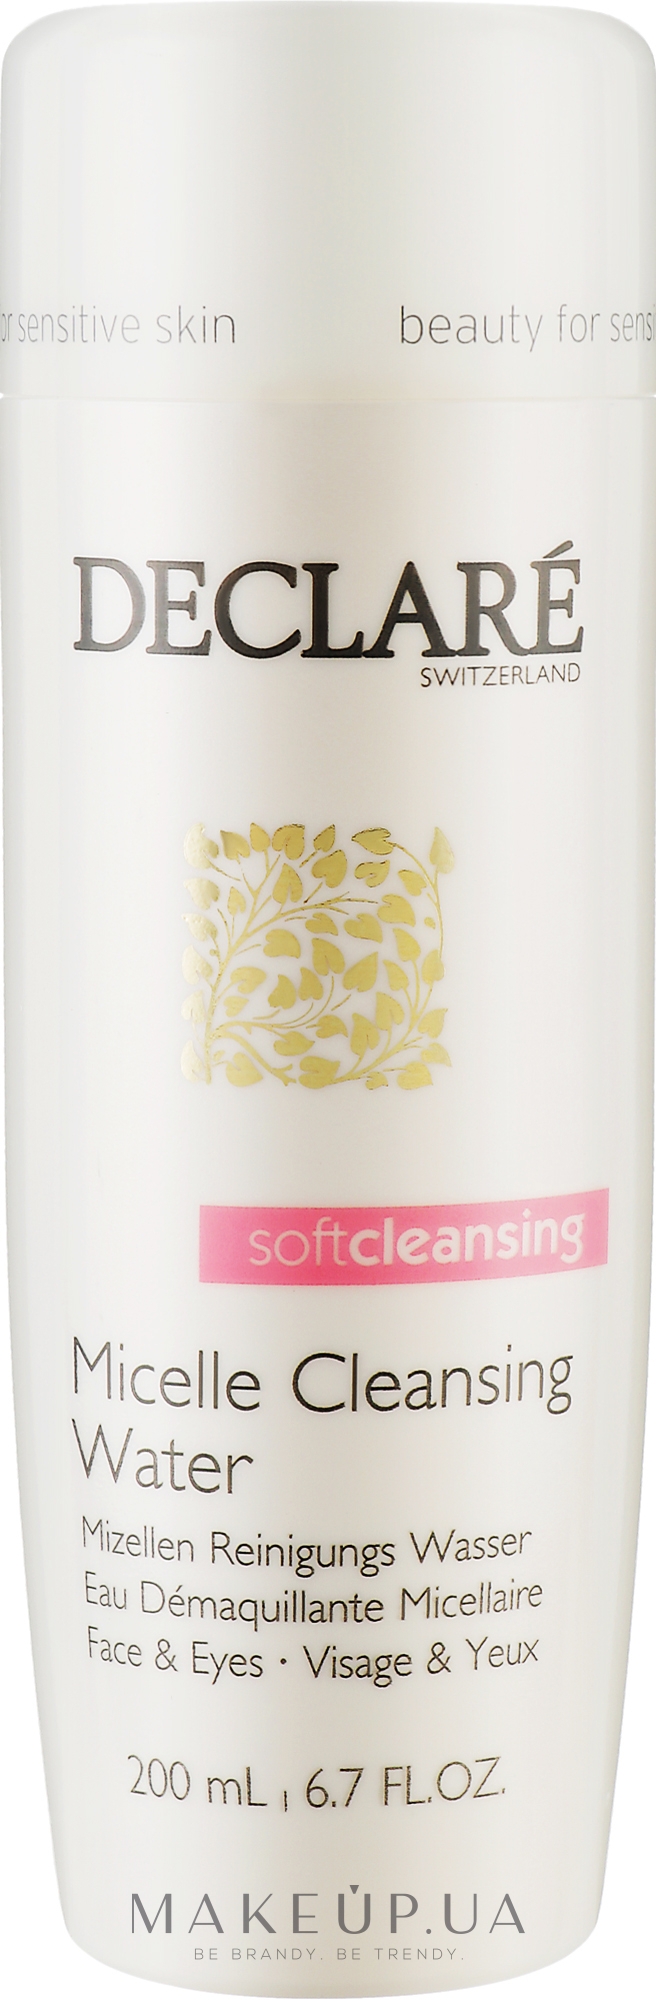 Мицеллярная вода - Declaré Soft Cleansing Micelle Cleansing Water — фото 200ml